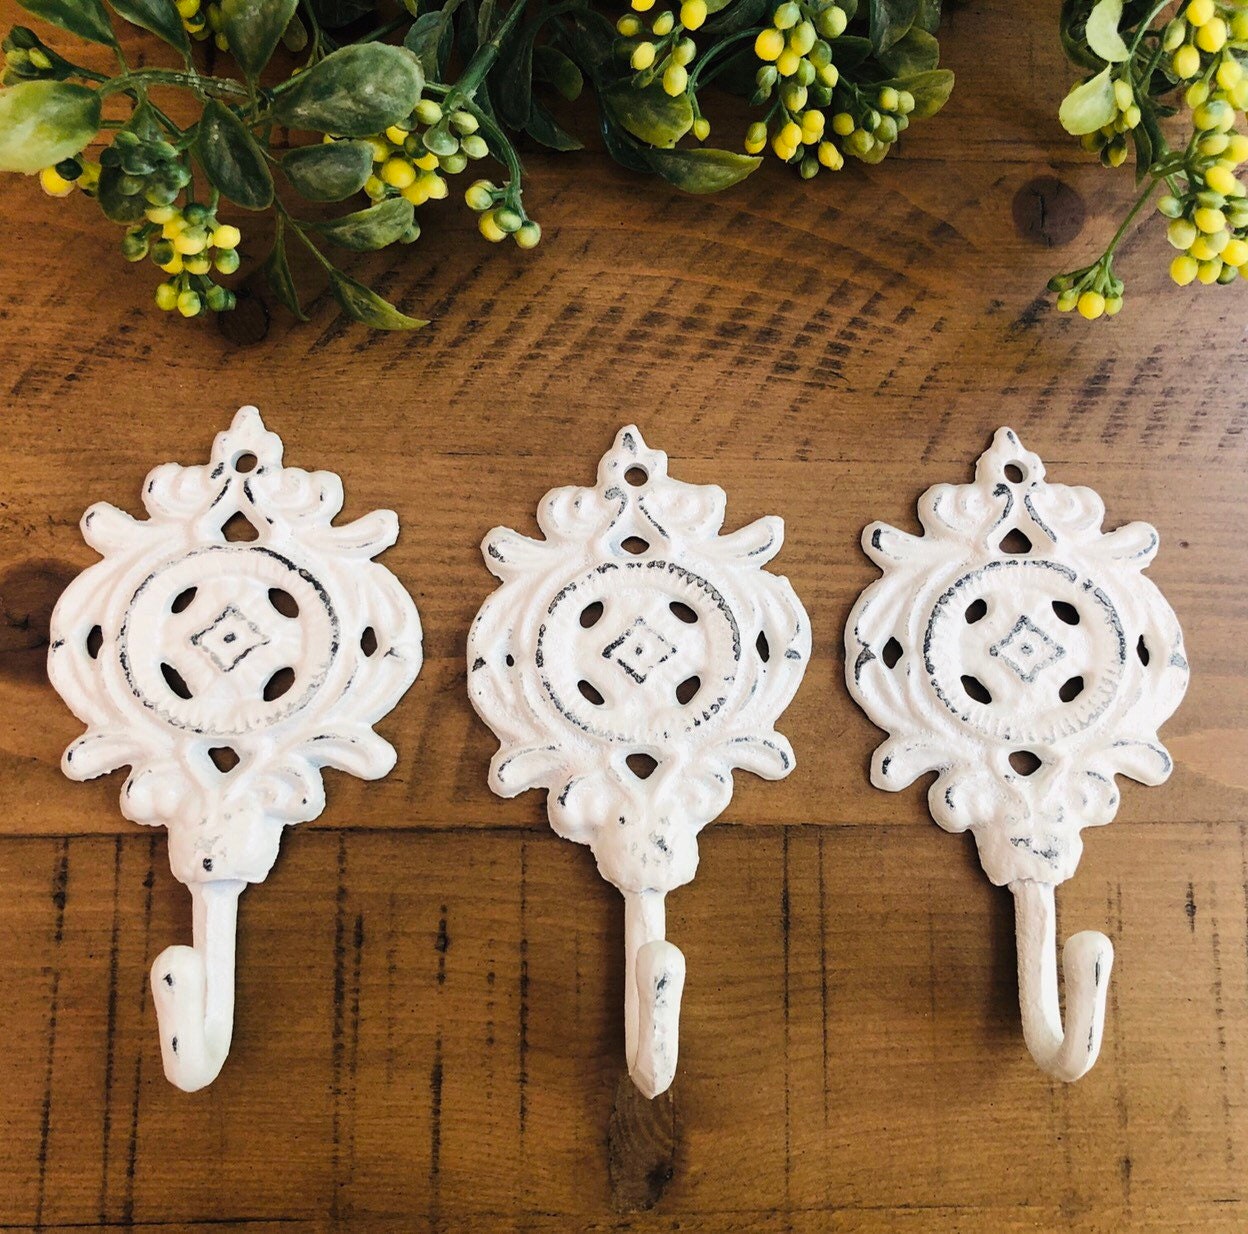 Cast iron Decorative wall hook/Pick color/ Shabby chic metal hooks/ Vintage hook/ cabin/ french country/ beach/ metal wall hook/mud room